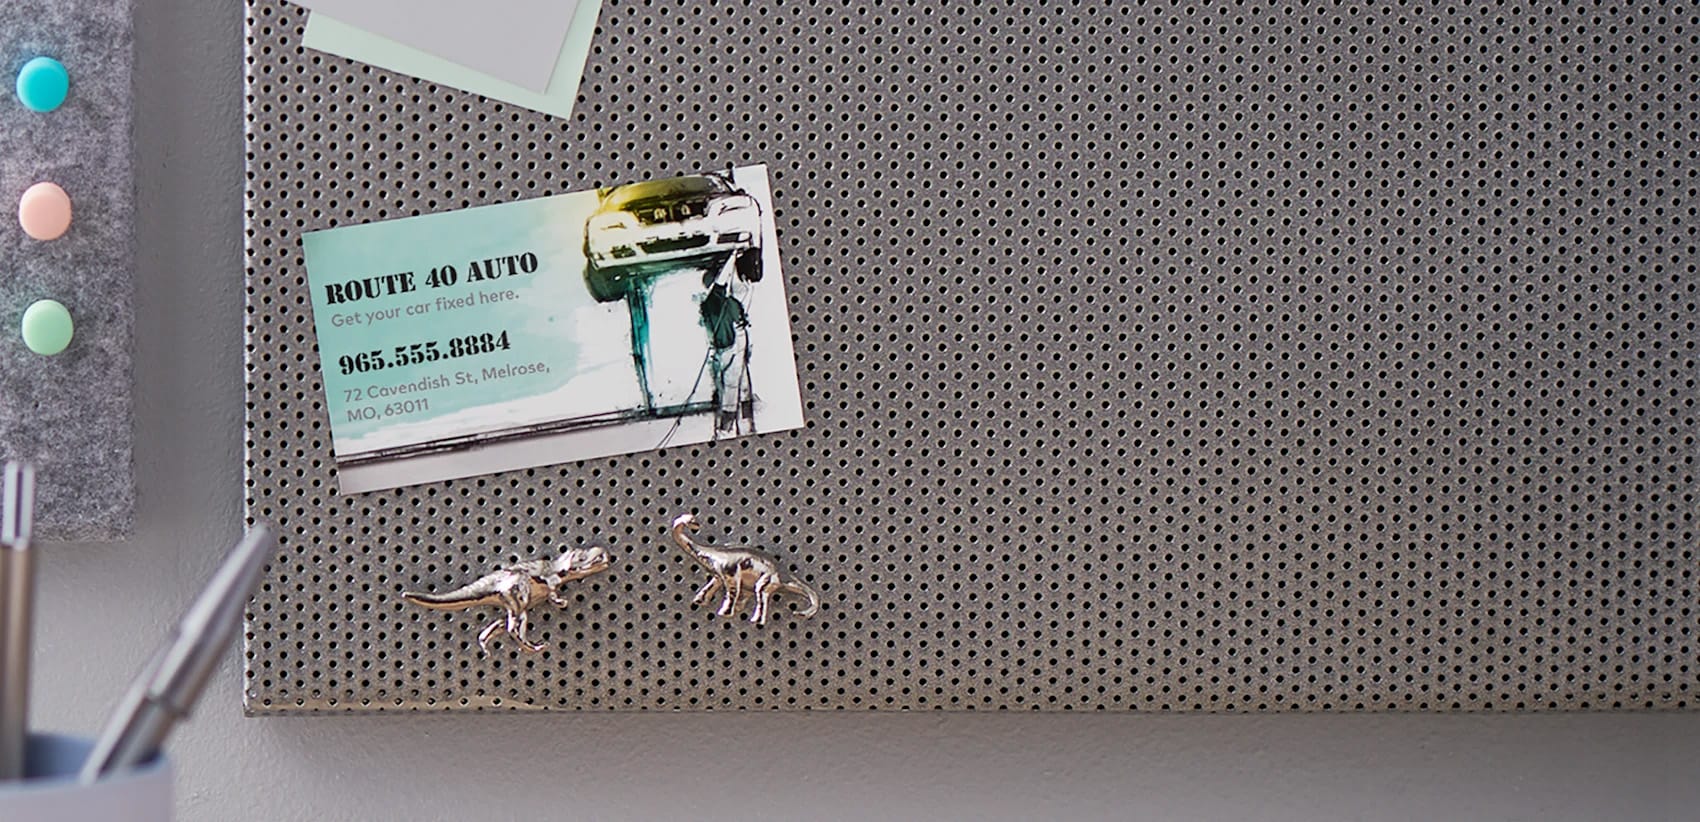 A magnetic business card on a metal surface